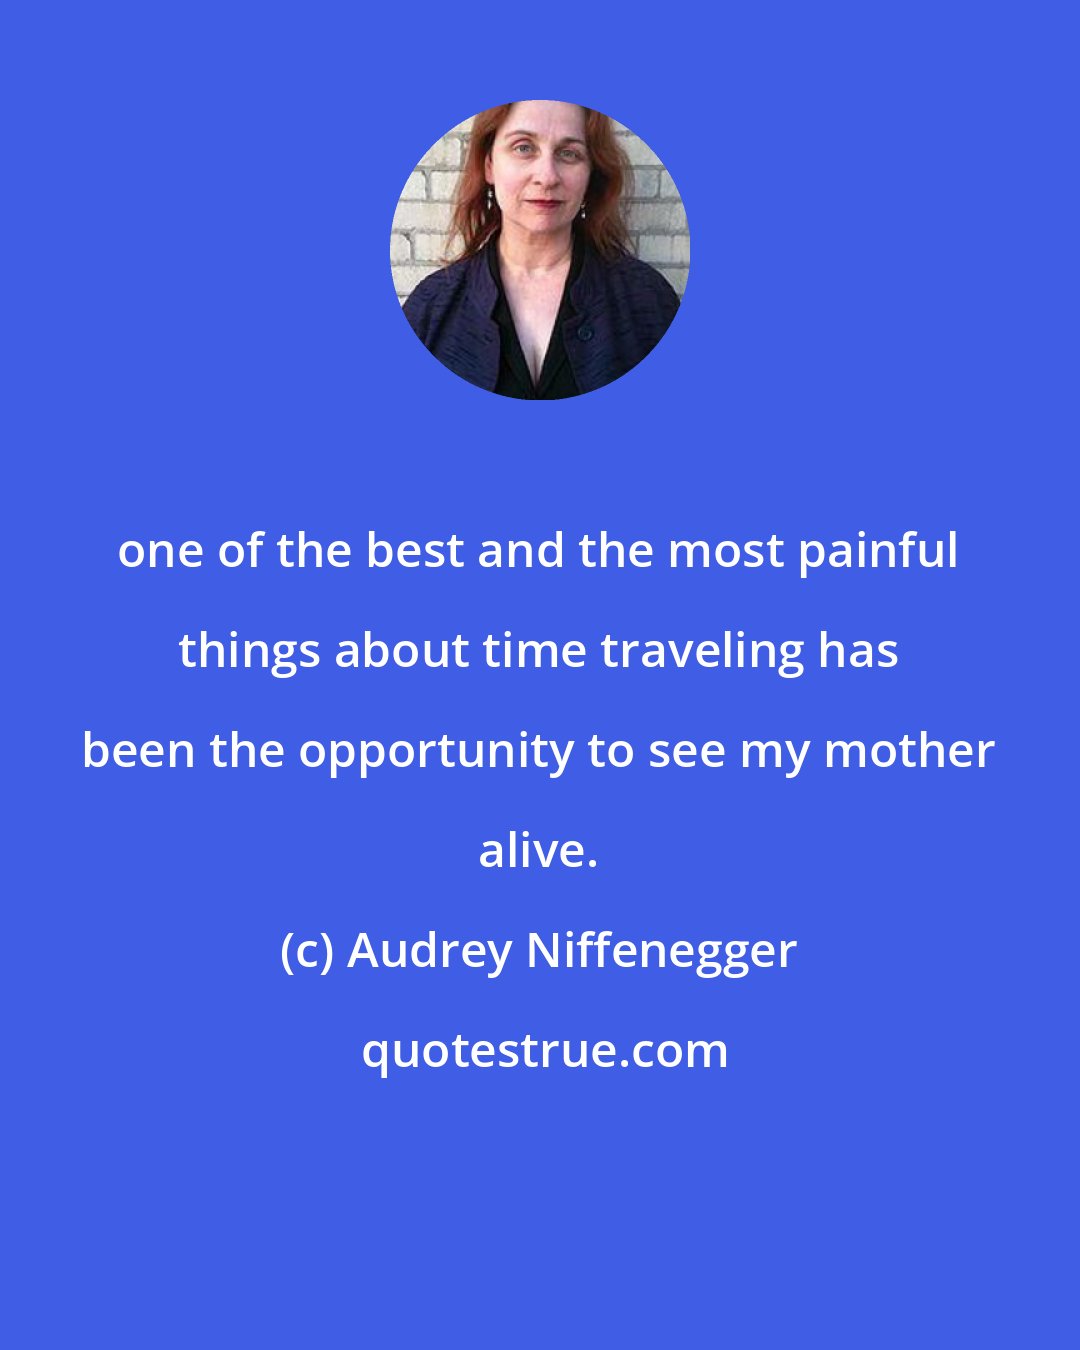 Audrey Niffenegger: one of the best and the most painful things about time traveling has been the opportunity to see my mother alive.